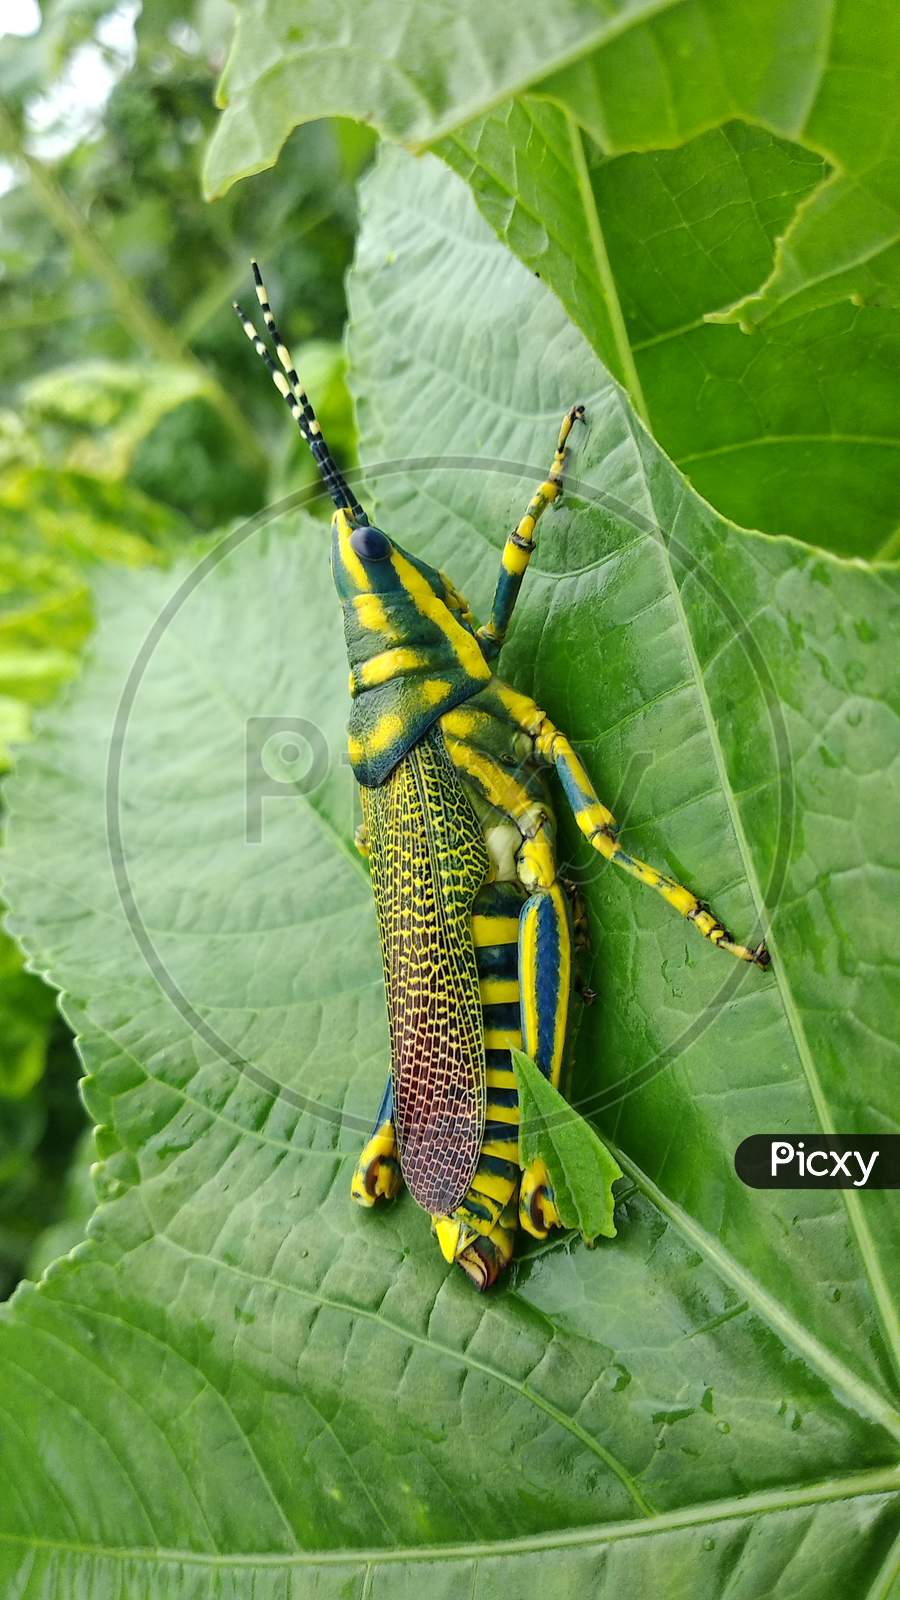 A Grasshopper is sitting on castor leaves in india 24 august 2020.